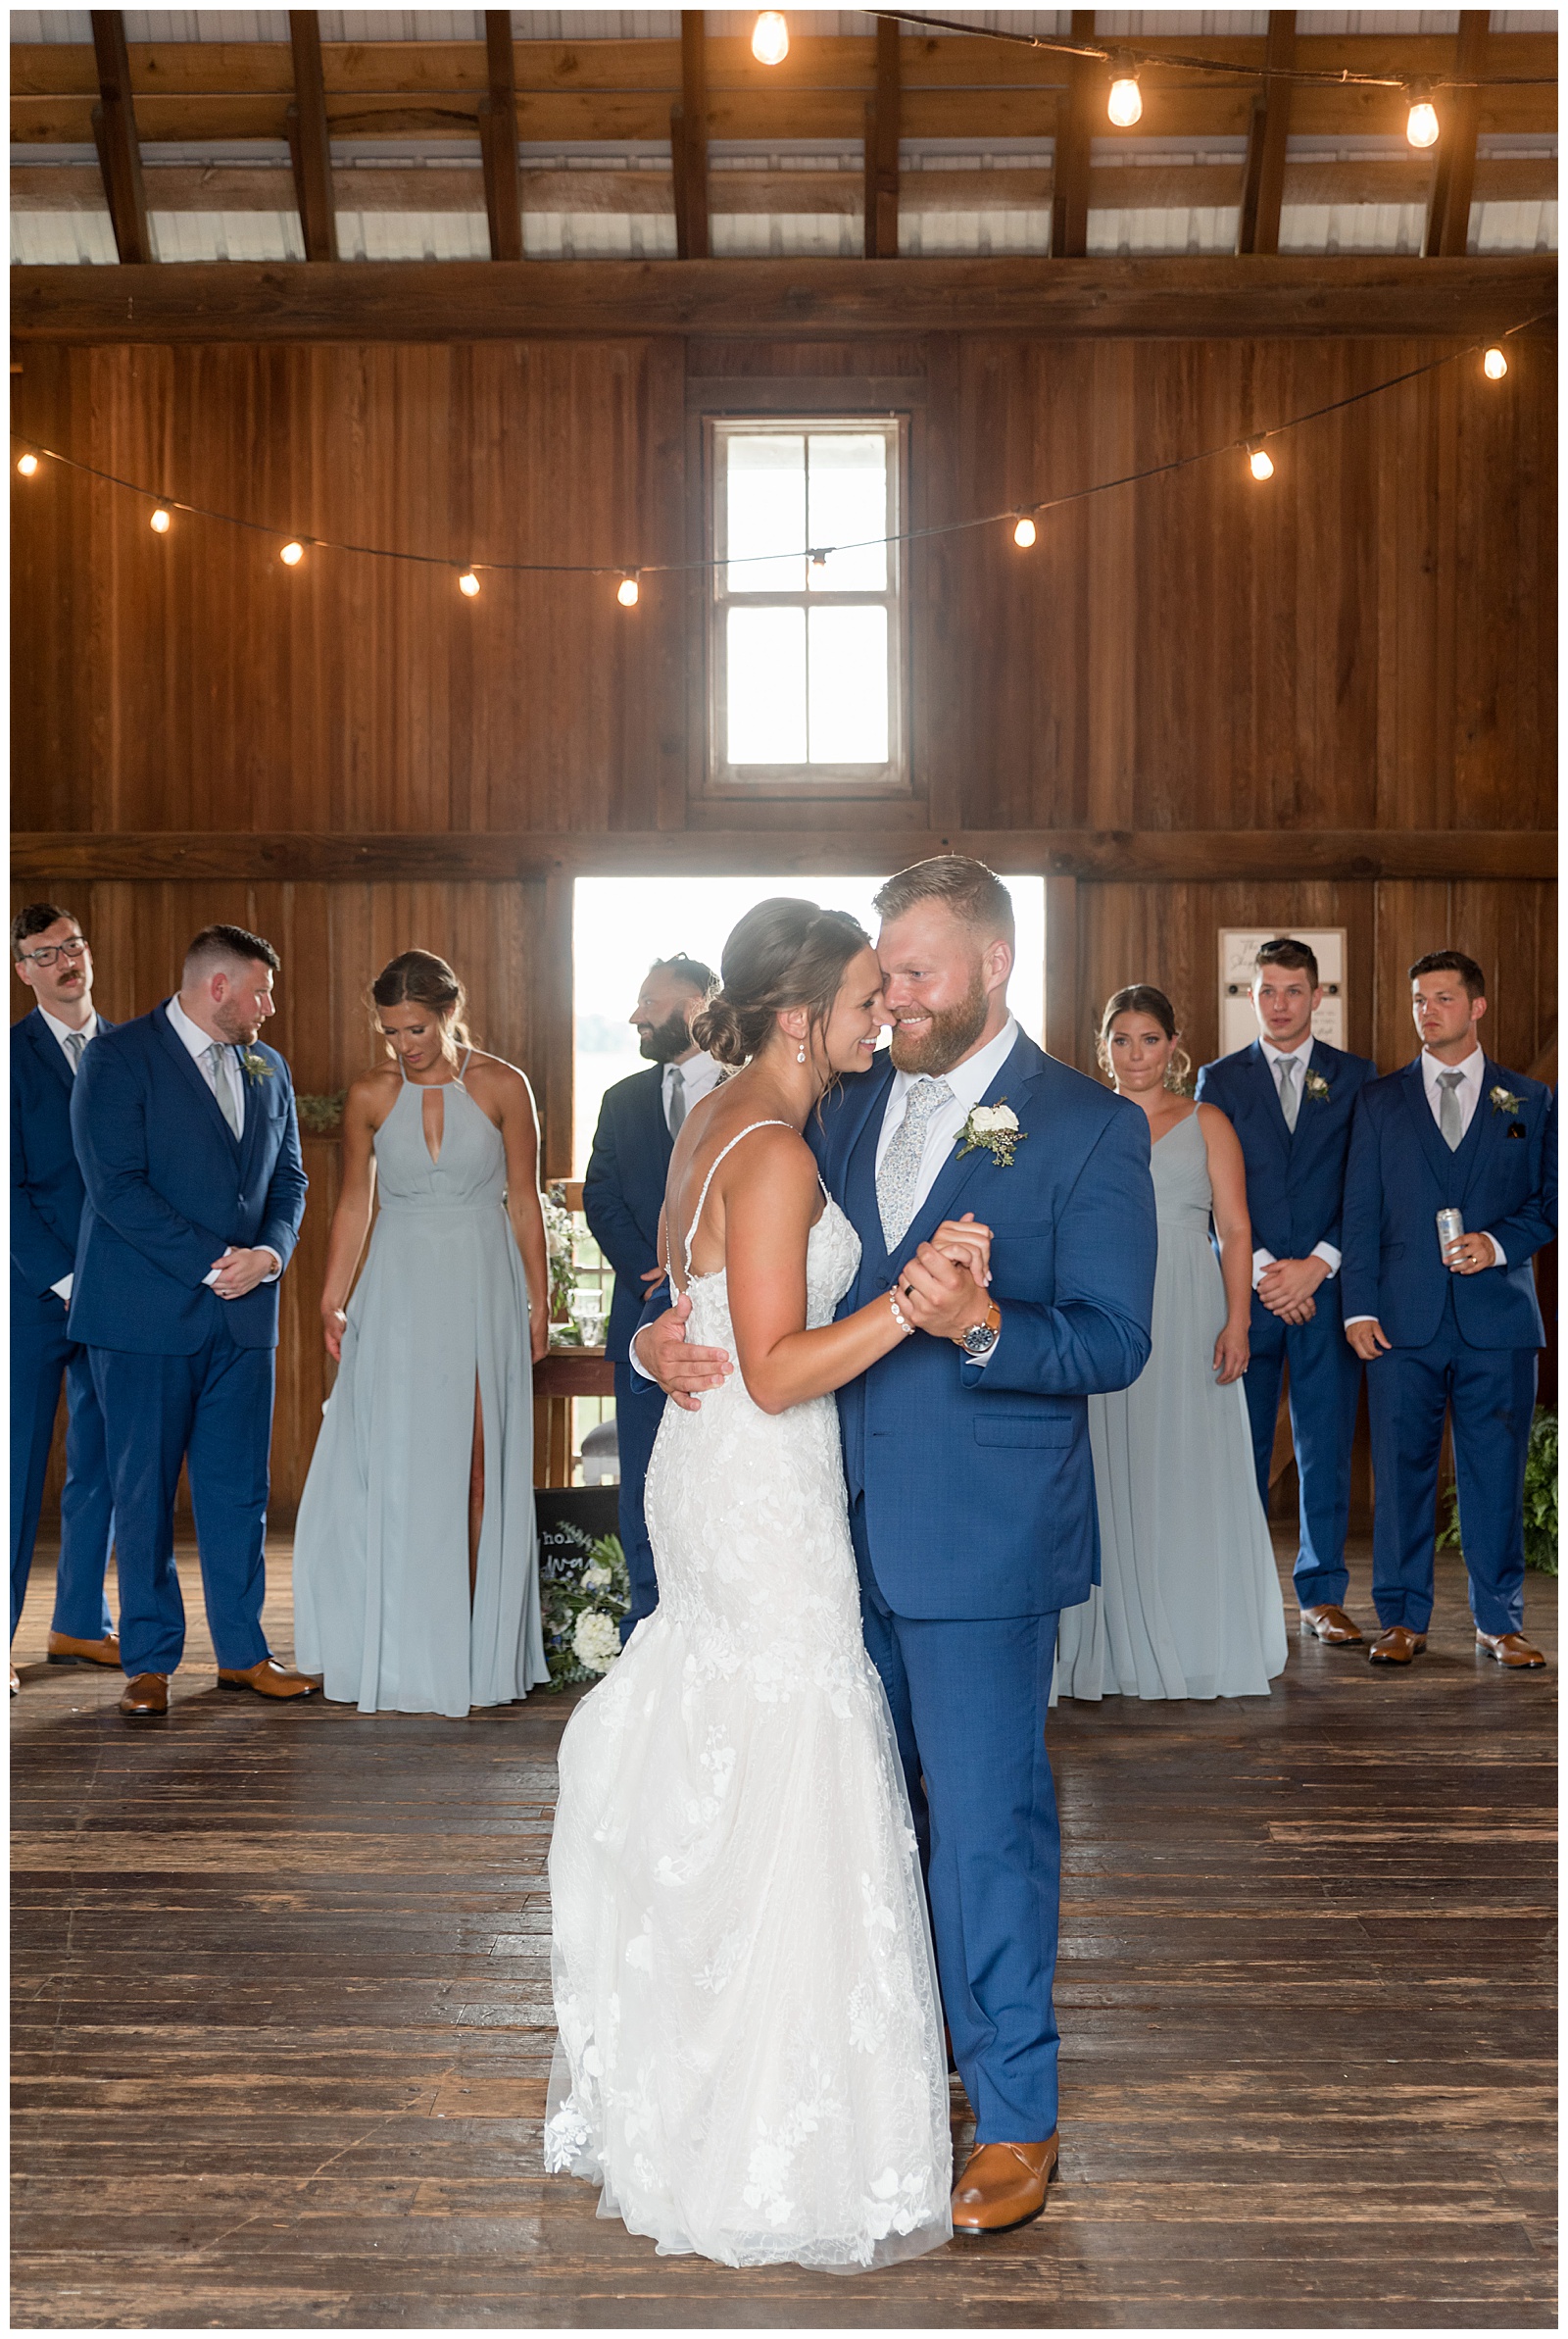 couple sharing their first dance inside beautiful barn reception at lakefield weddings